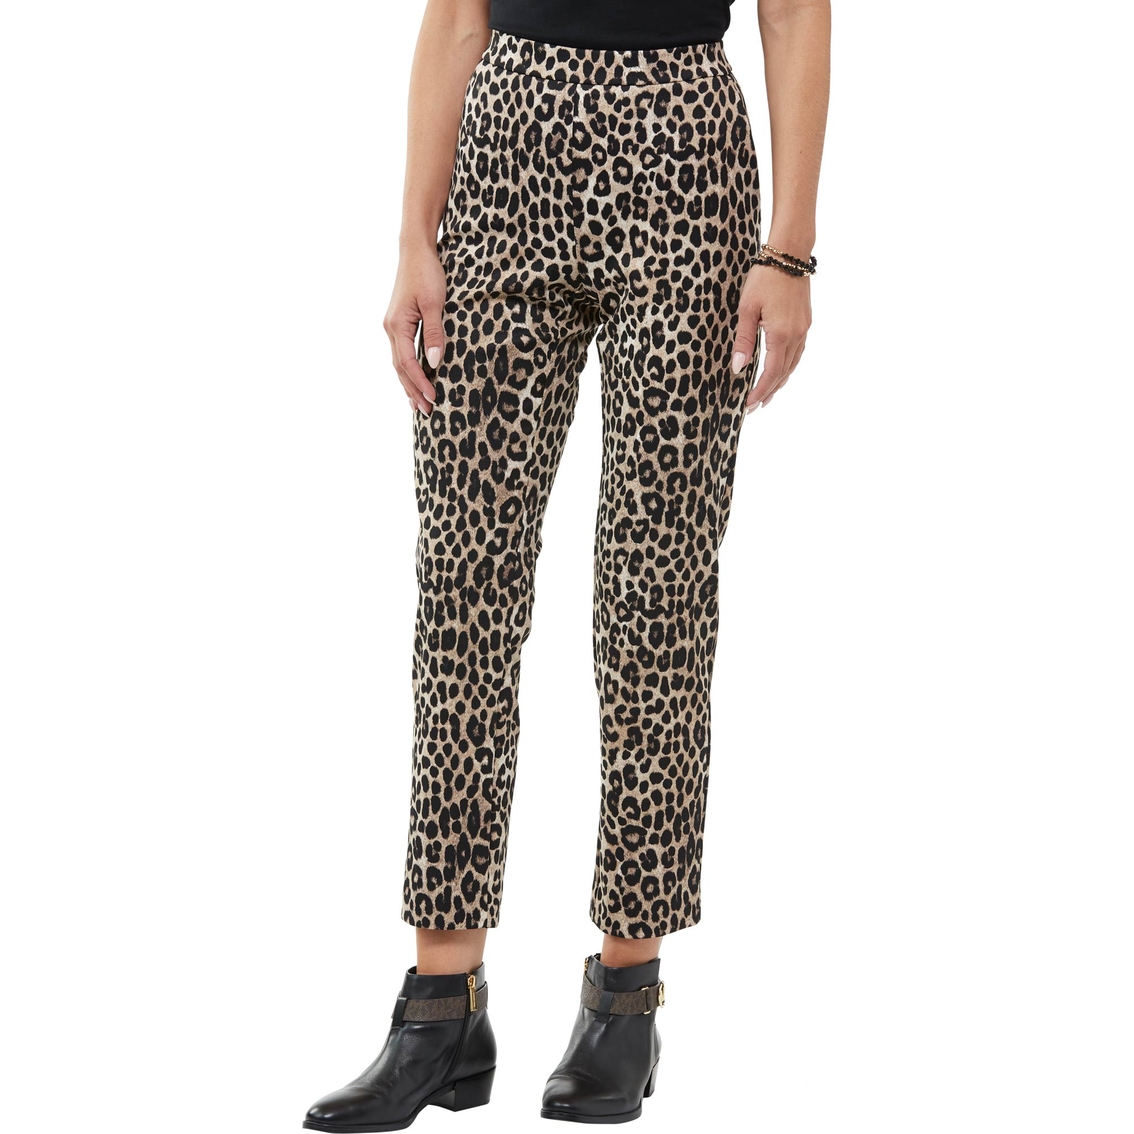 Michael Kors Cheetah Pull On Trouser | Pants | Clothing & Accessories ...